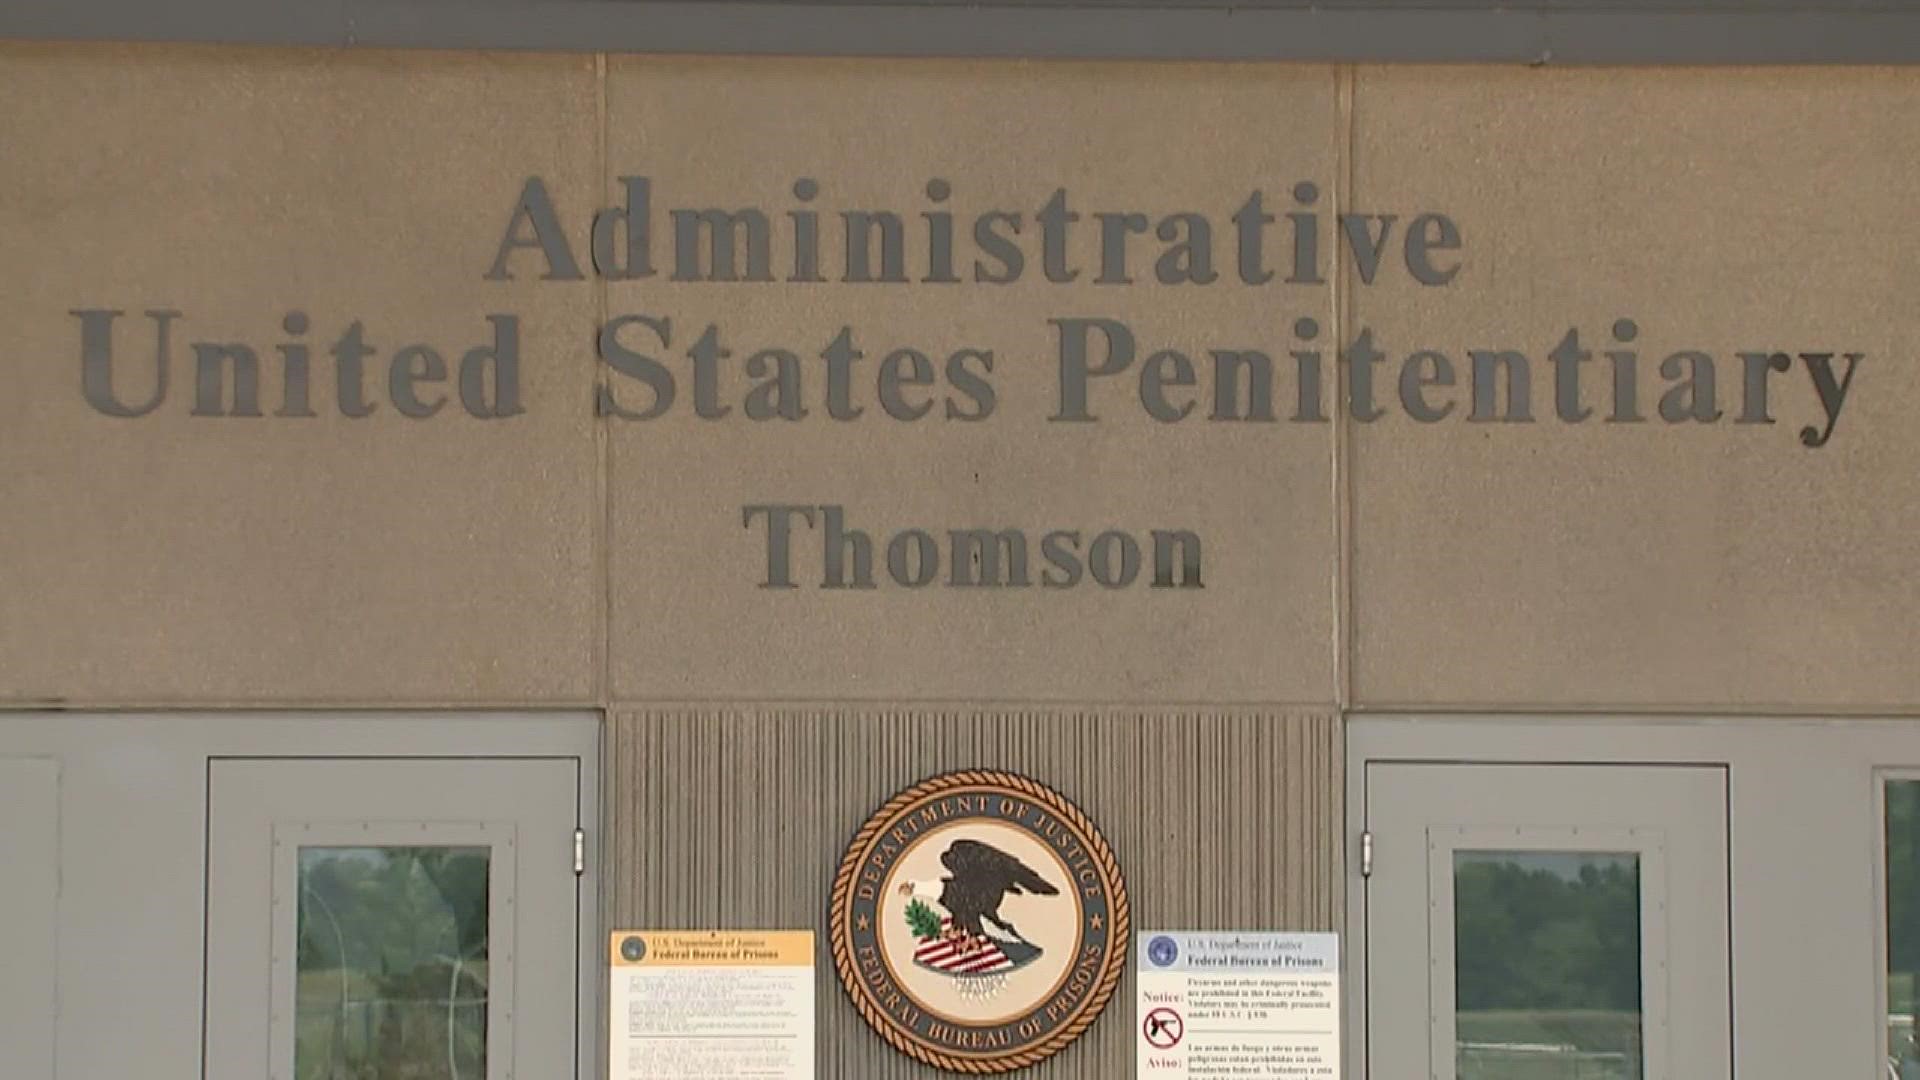 The prison's staff union has been pushing for the bonus since August 2020, to curb high turnover rates and staff shortages.